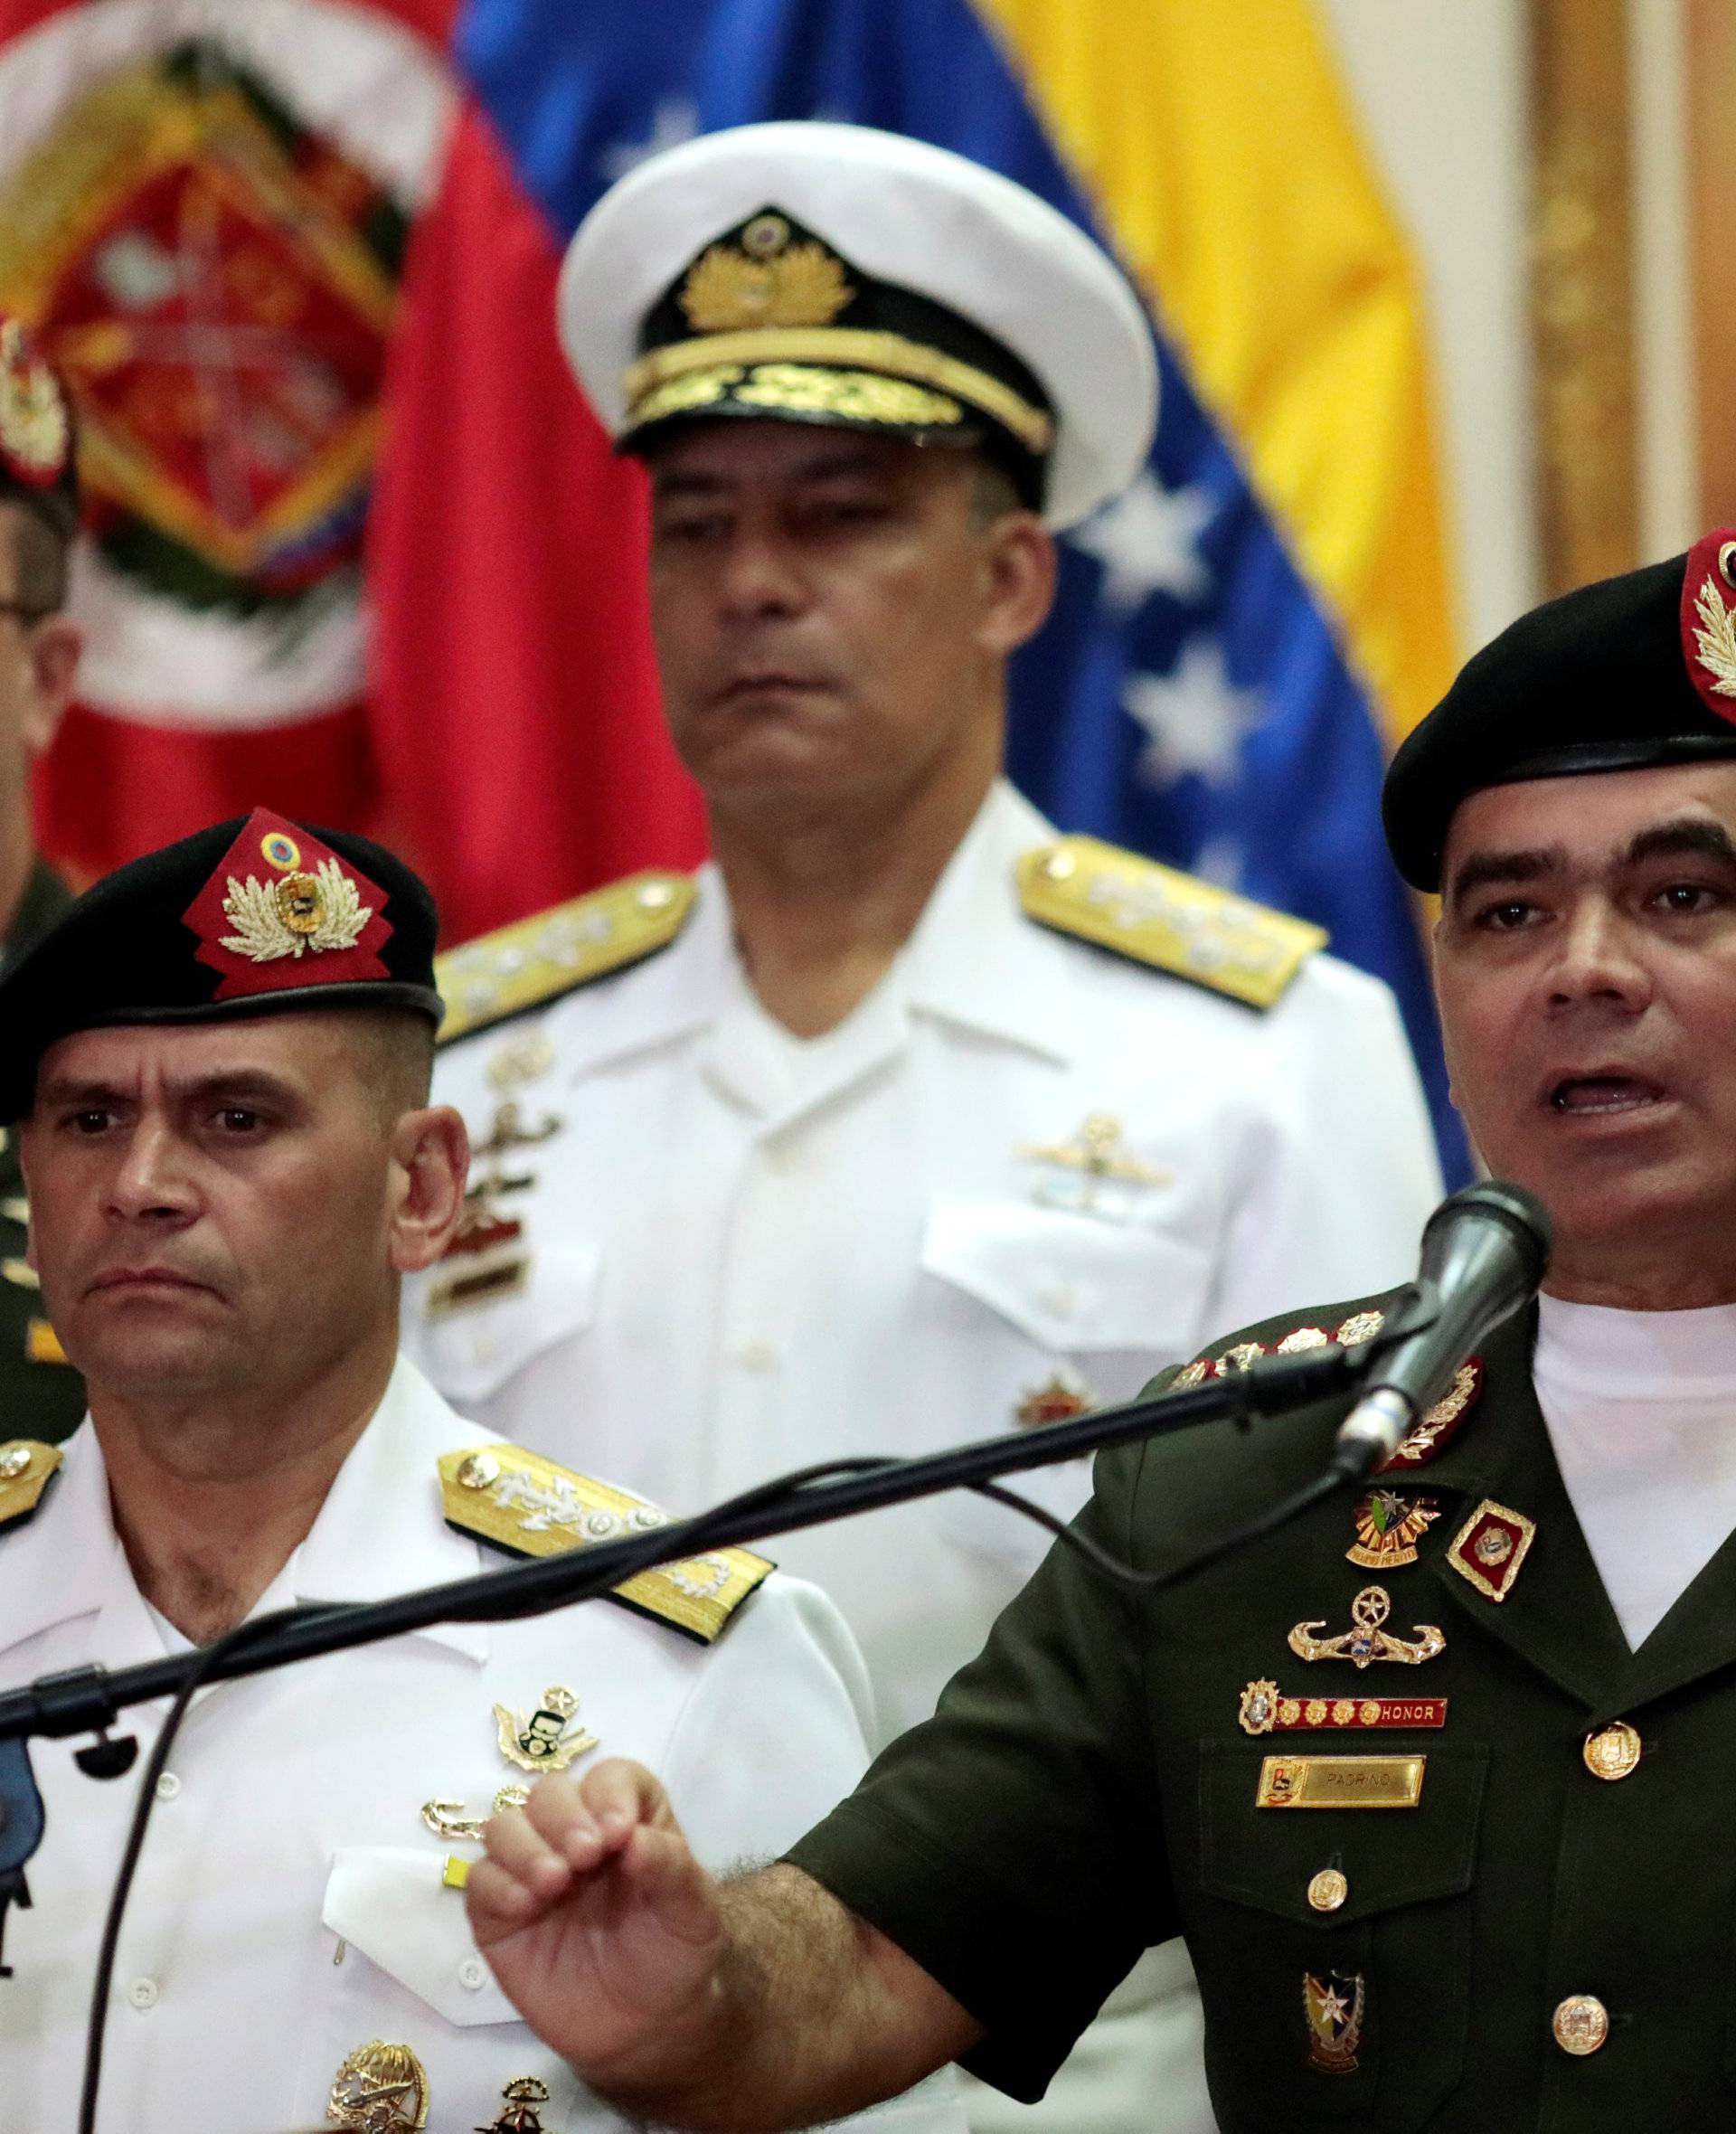 Venezuela's Defense Minister Padrino speaks during a news conference in Caracas